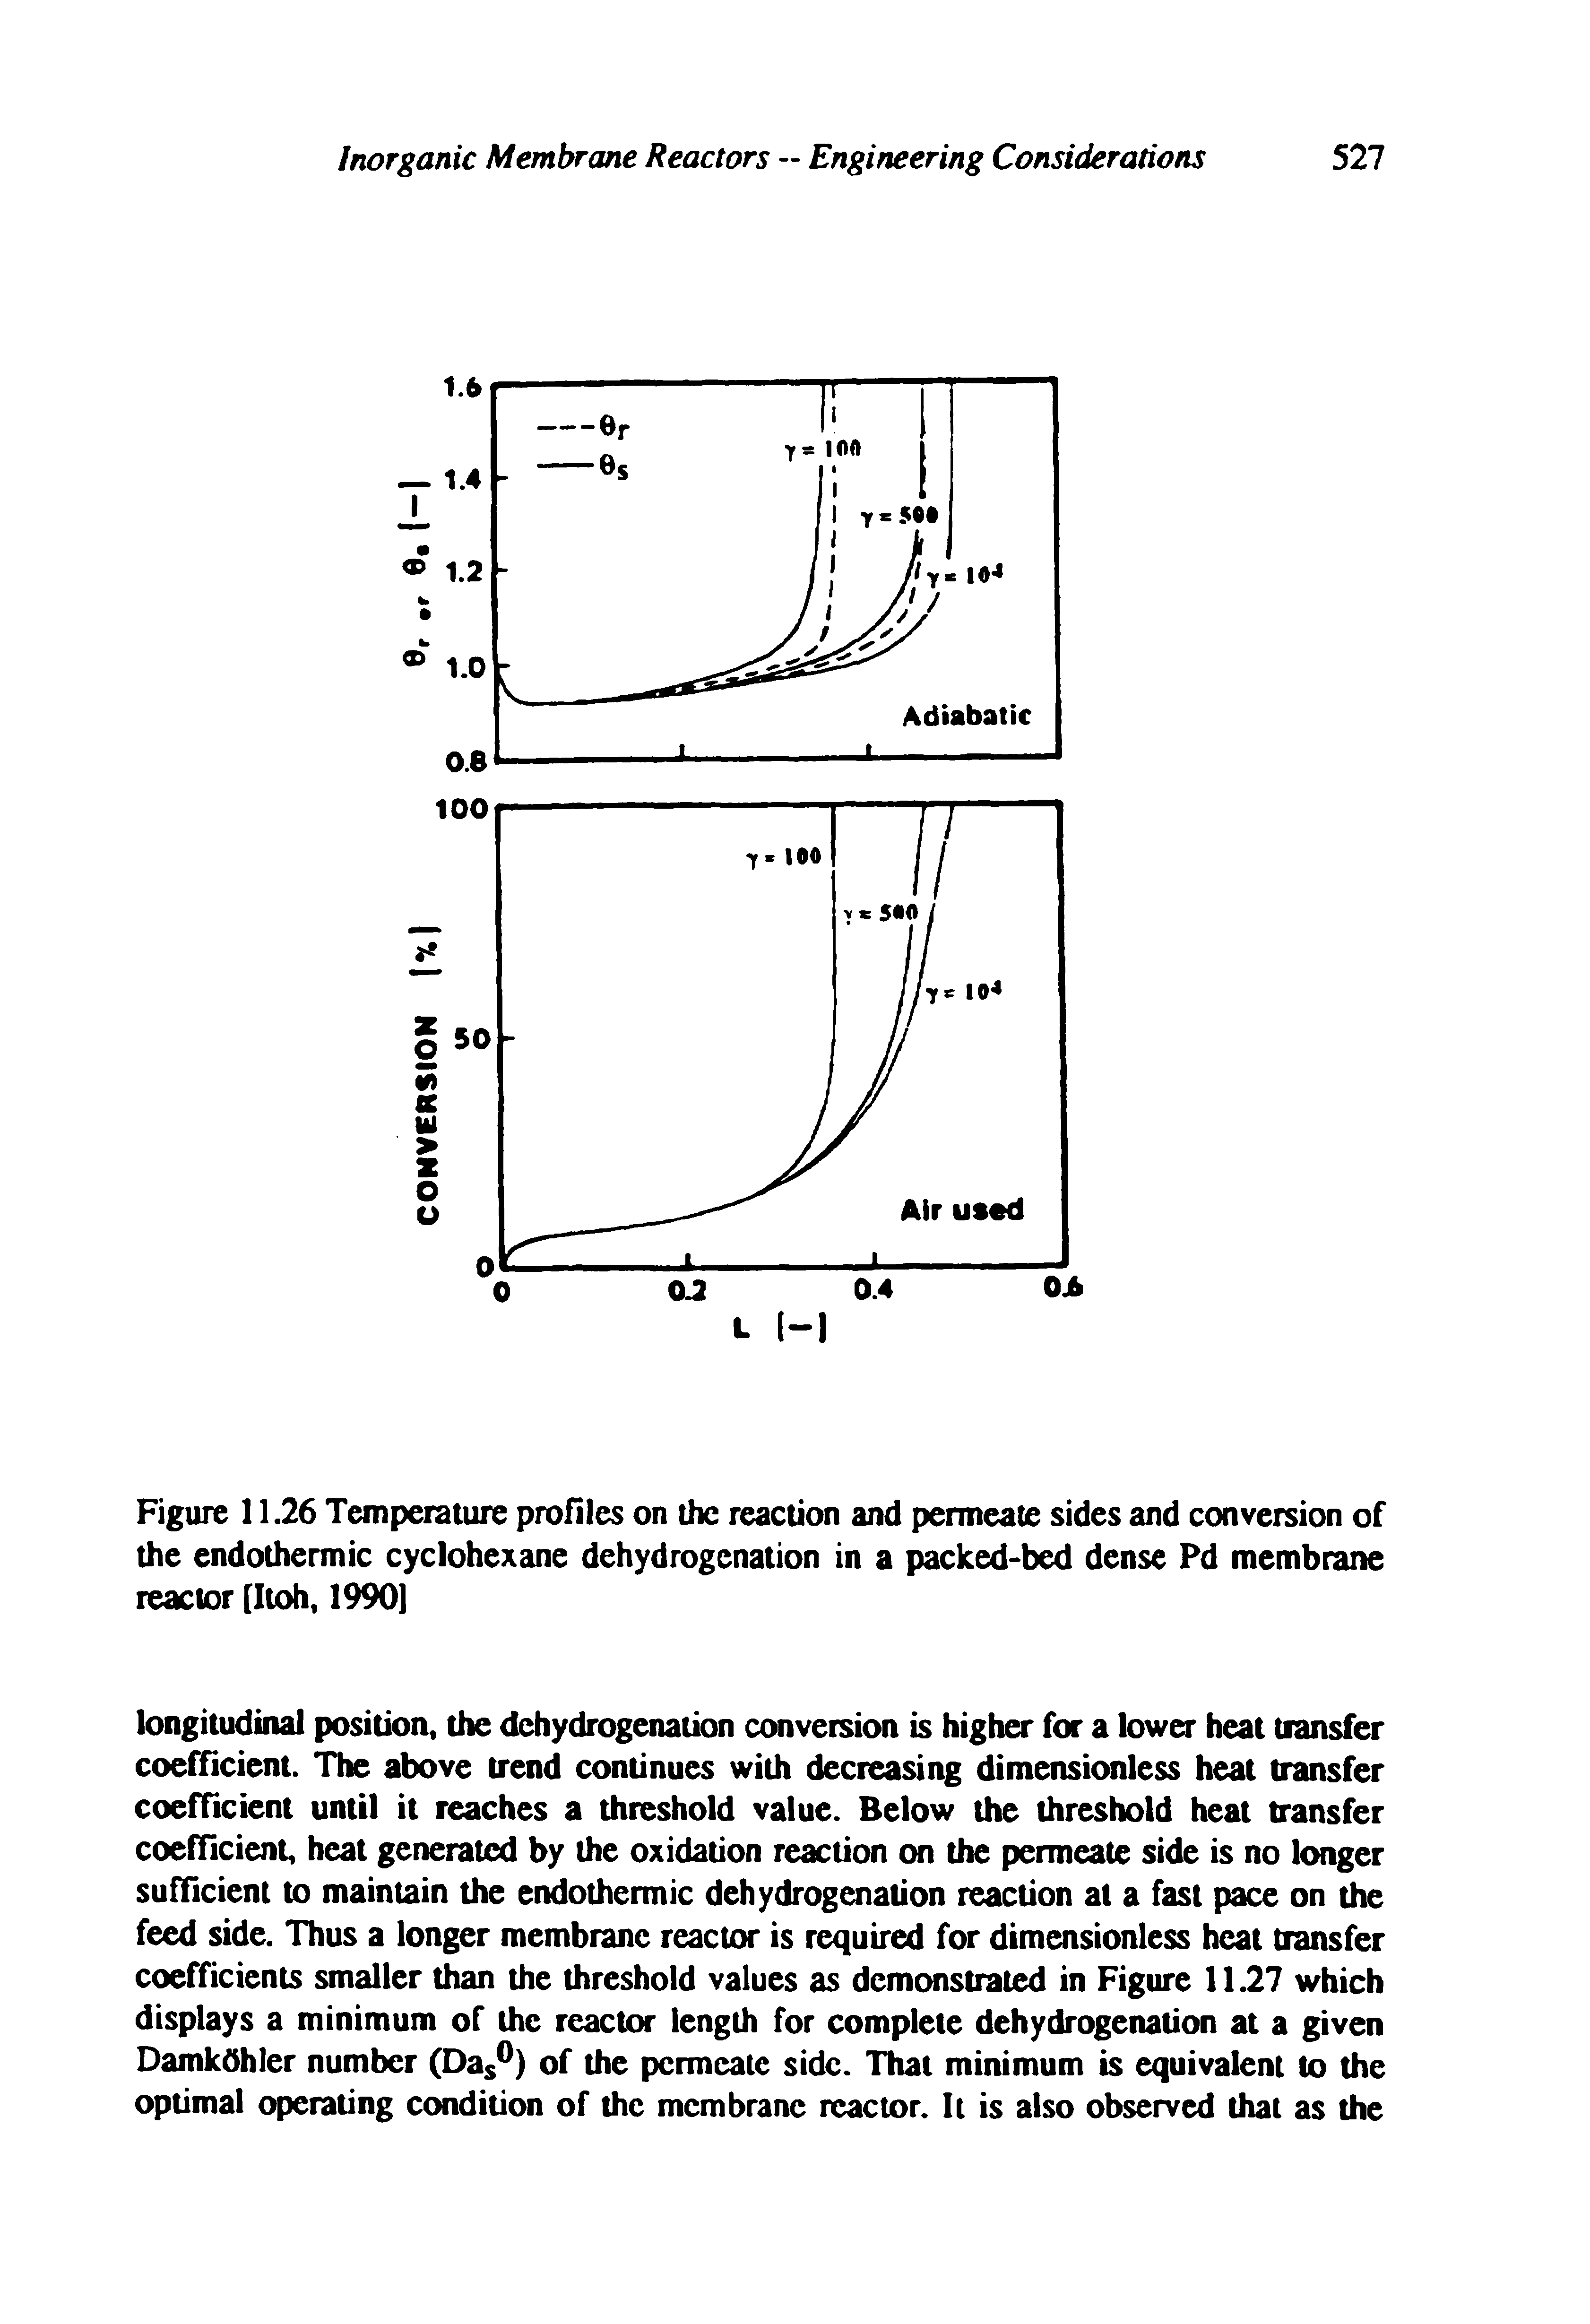 Figure 11.26 Temperature profiles on the reaction and permeate sides and conversion of the endothermic cyclohexane dehydrogenation in a packed-bed dense Pd membrane reactor (Itoh, 1990]...